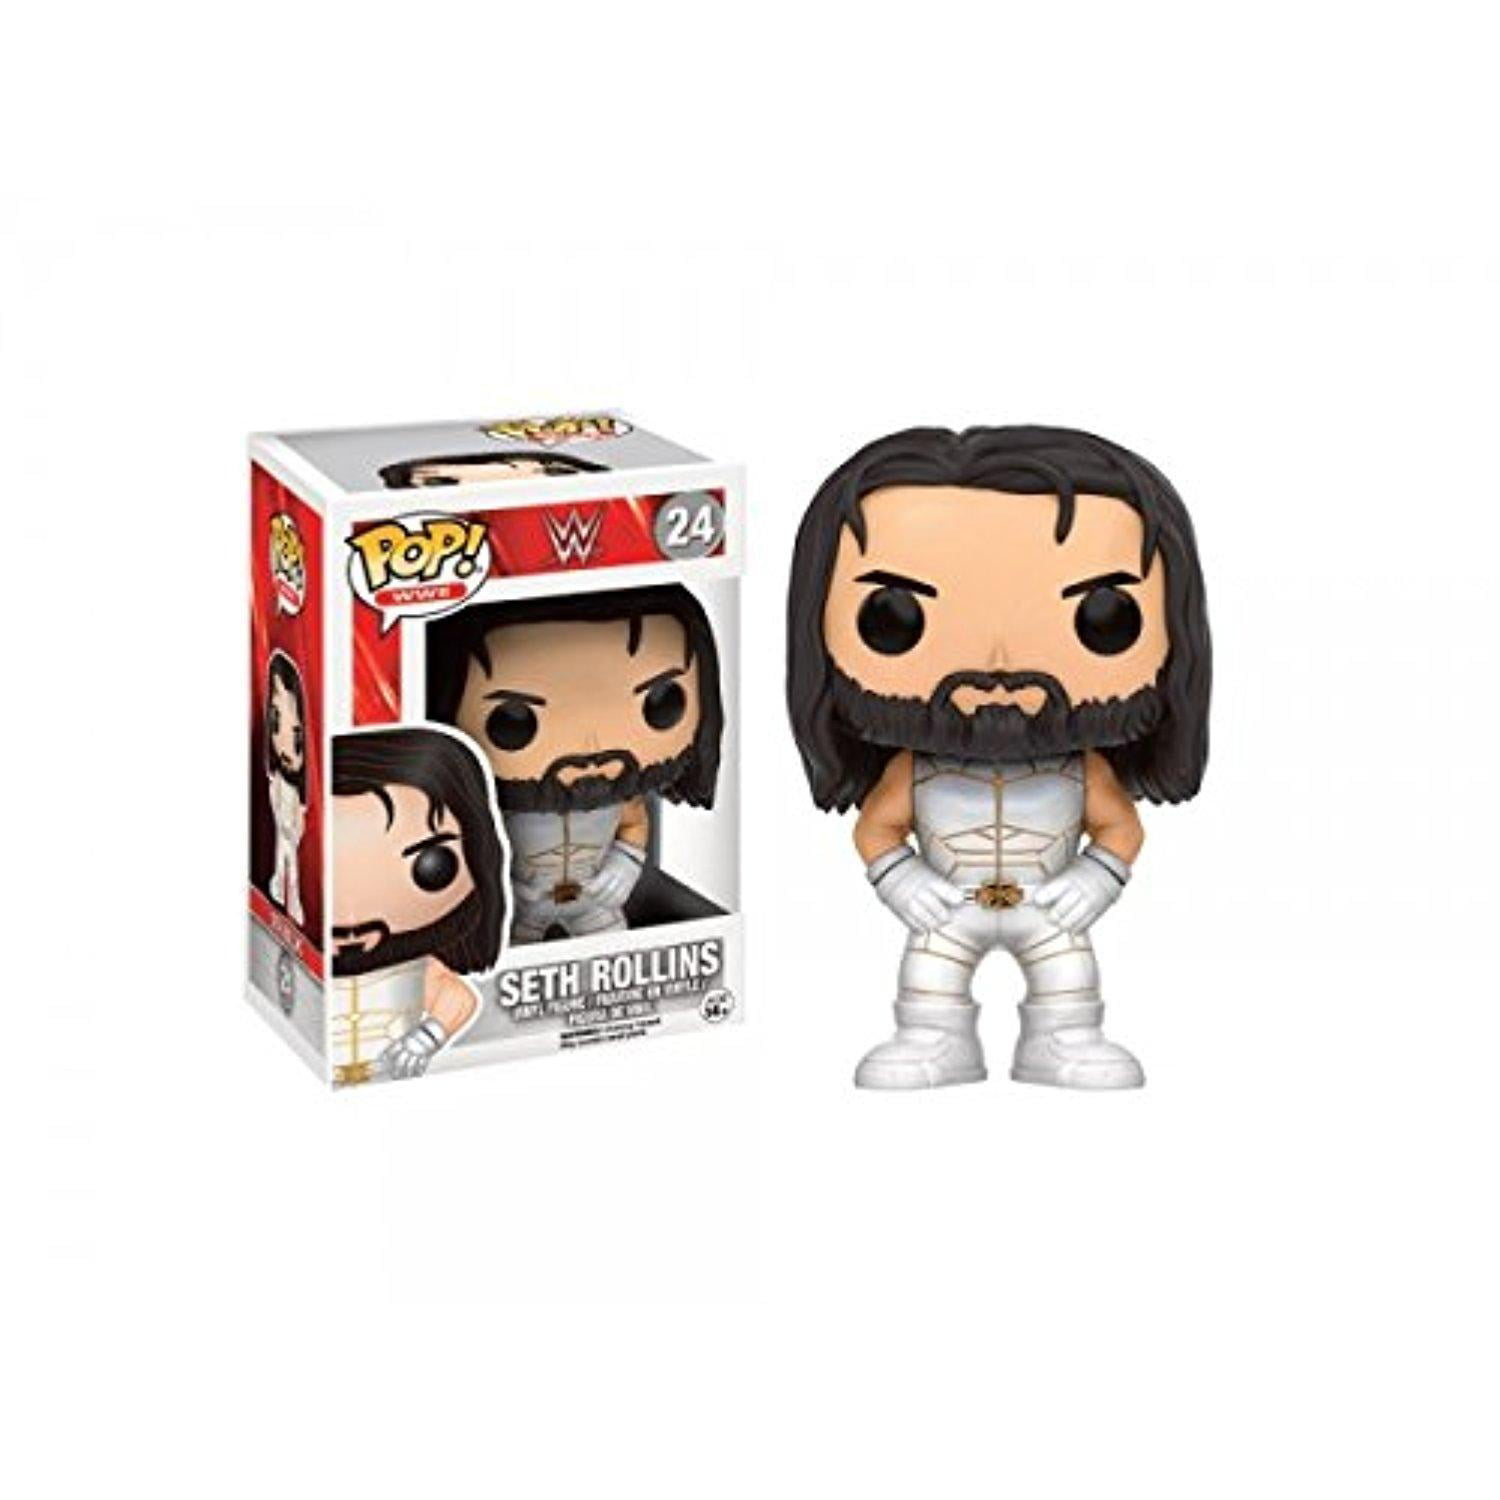 WWE Wrestling Seth Rollins Action Figure Vaulted NEW Details about   Funko Pop 